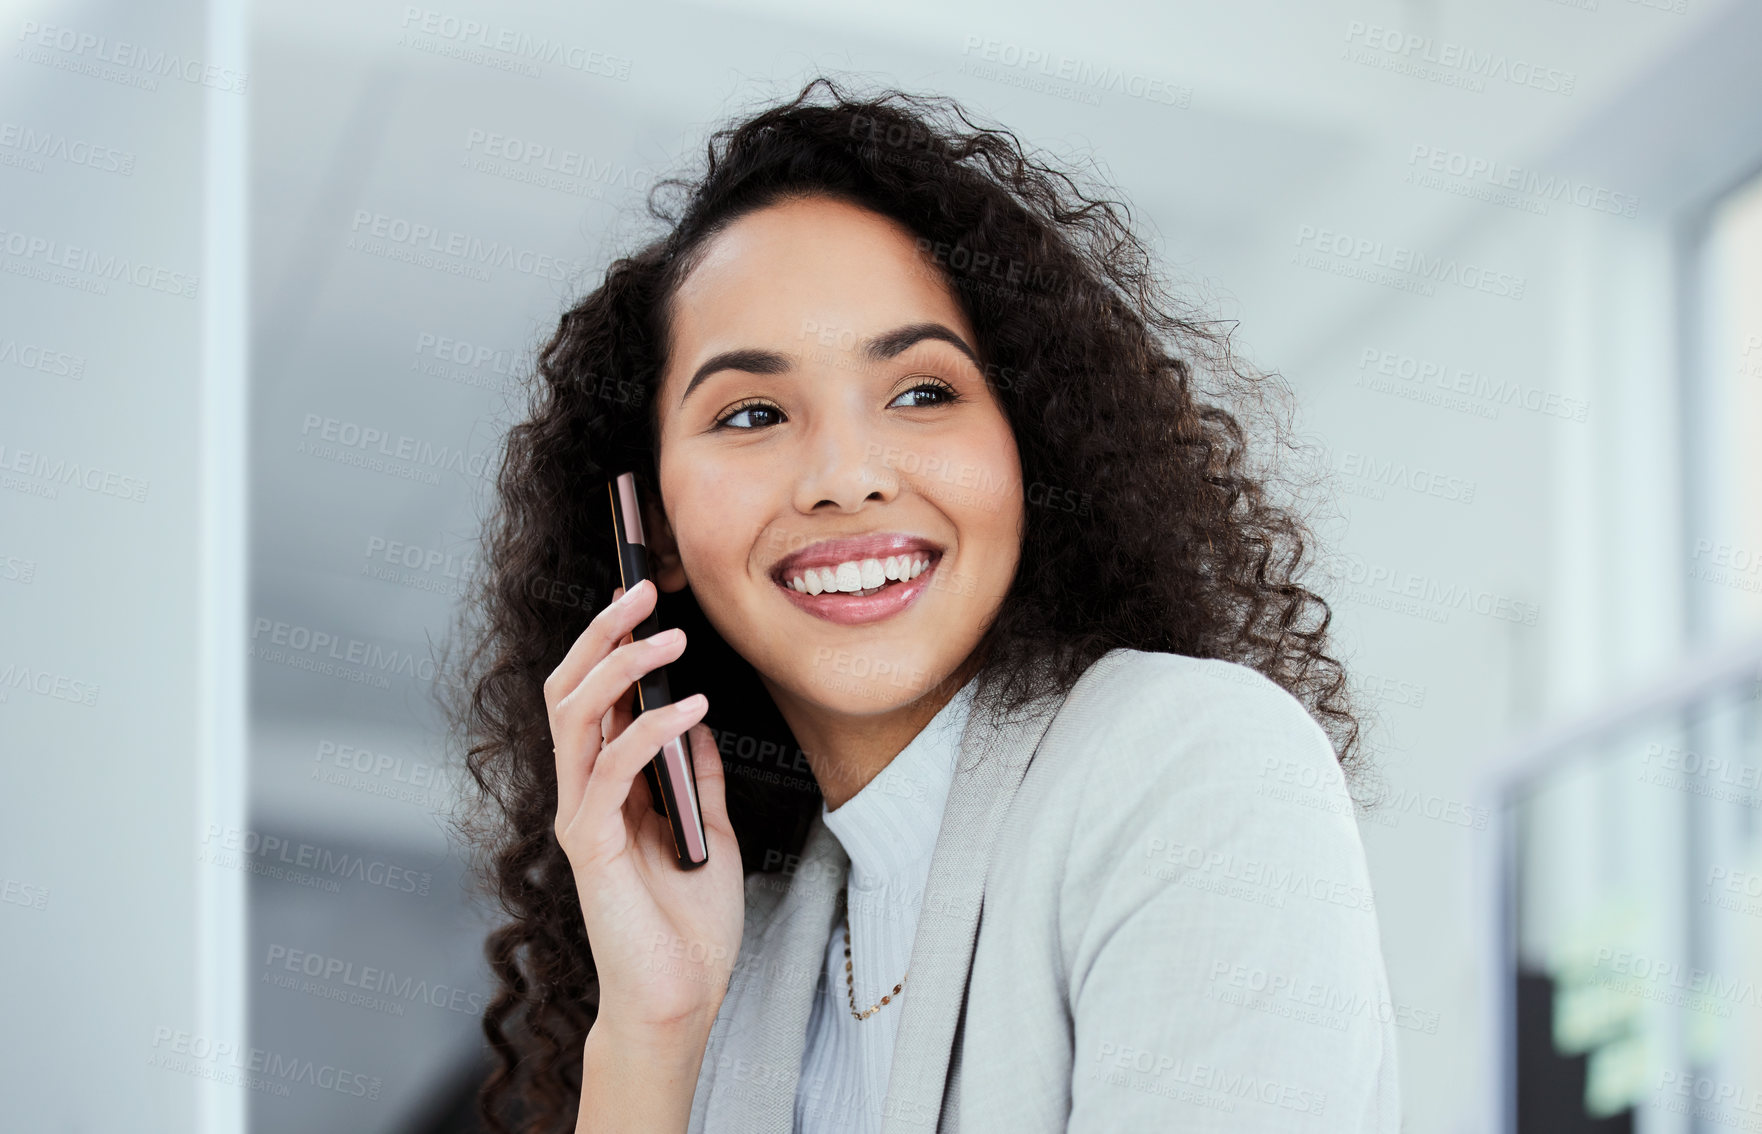 Buy stock photo Shot of a young businesswoman using her smartphone to make a phone call